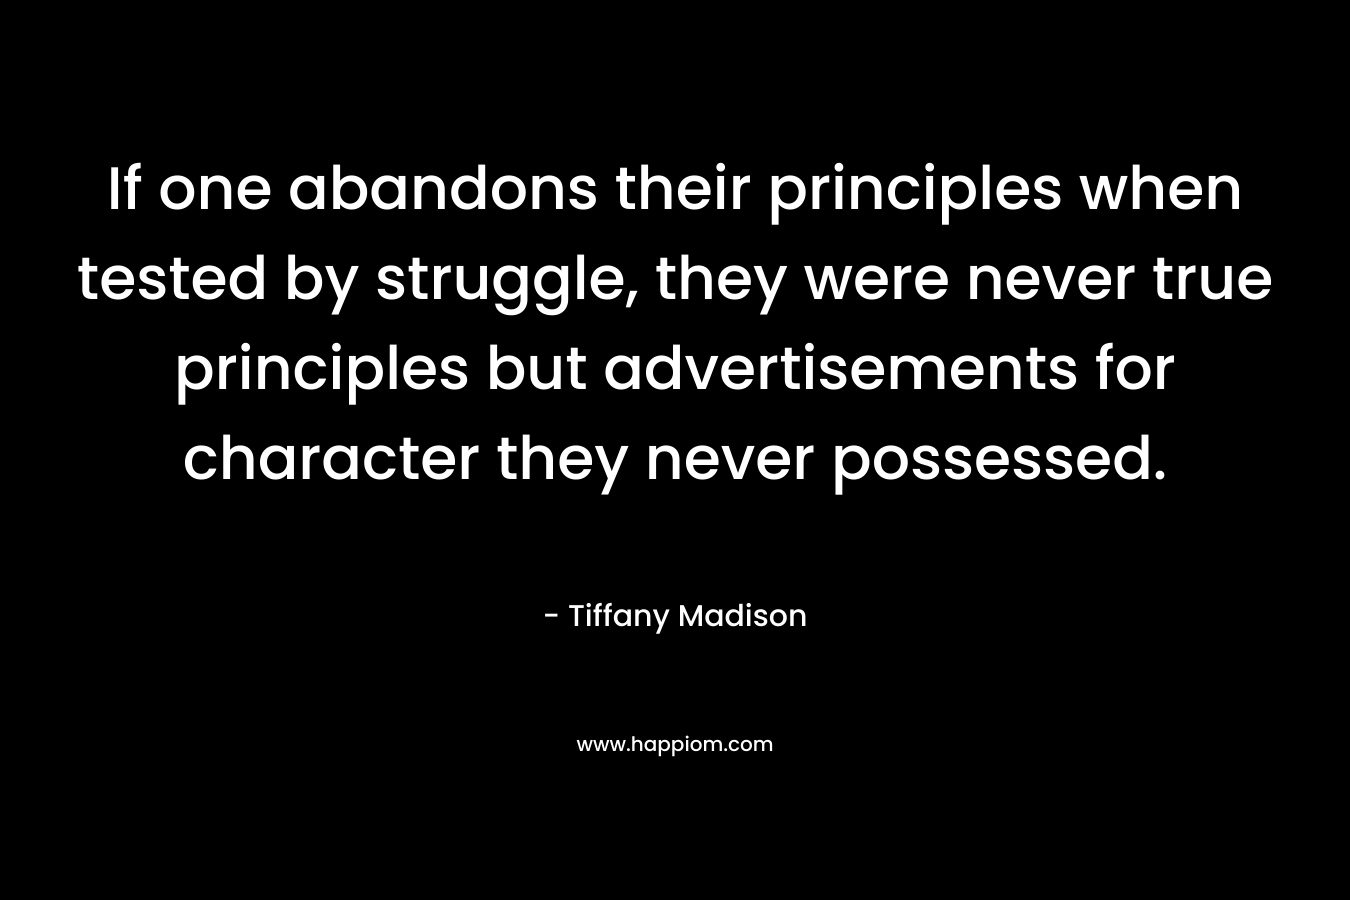 If one abandons their principles when tested by struggle, they were never true principles but advertisements for character they never possessed.